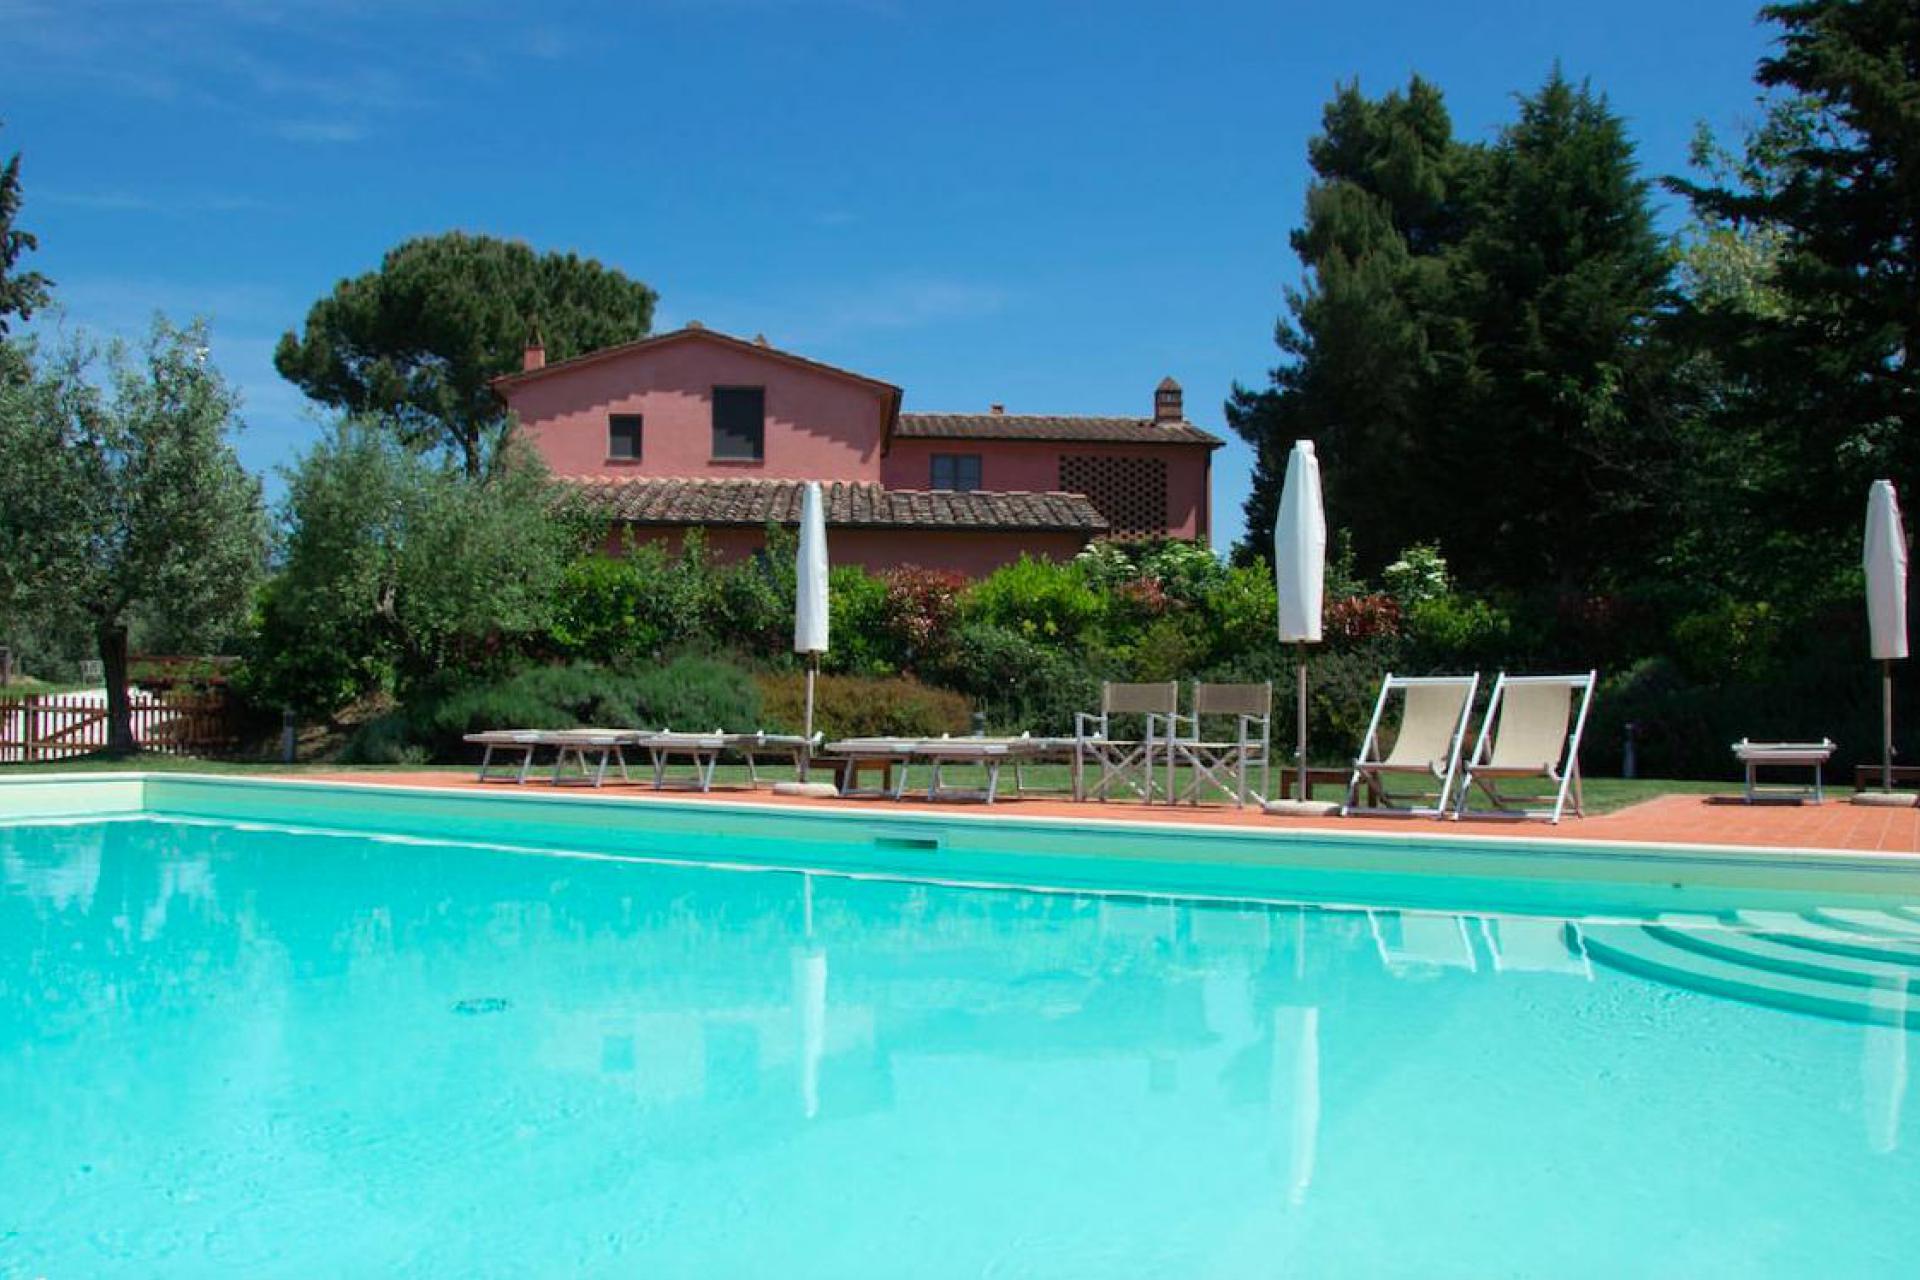 Hospitable agriturismo with beautiful apartments